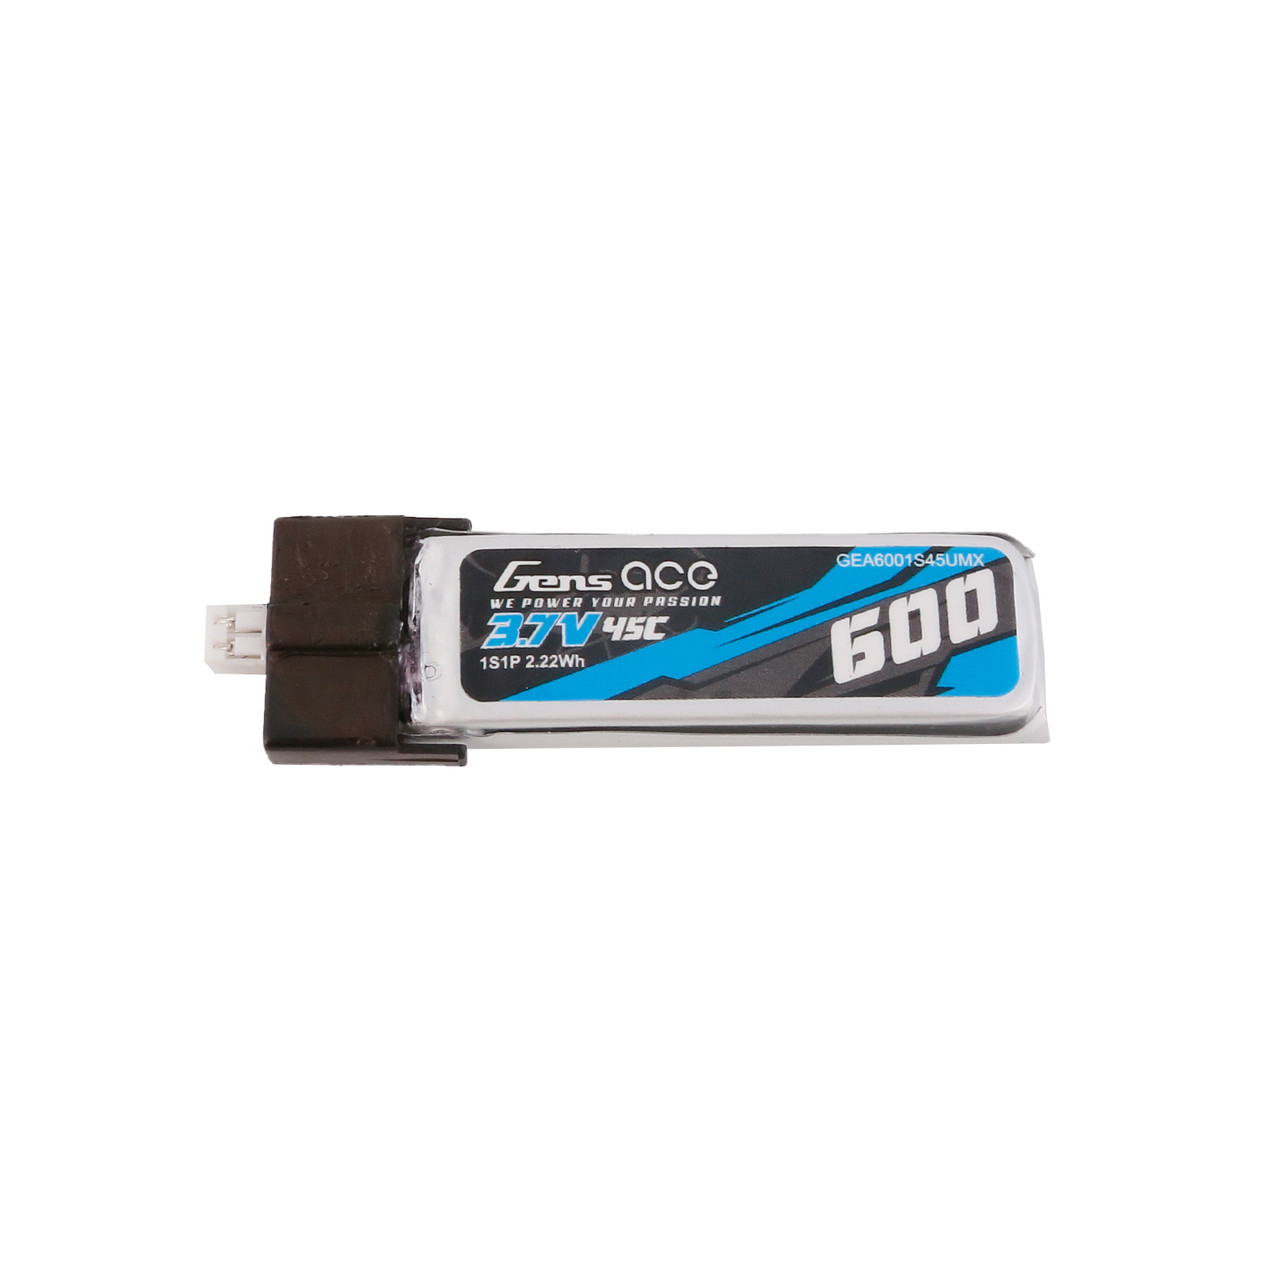 Gens ace 600mAh 3.7V 45C 1S1P Lipo Battery Pack withJST-PHR Plug